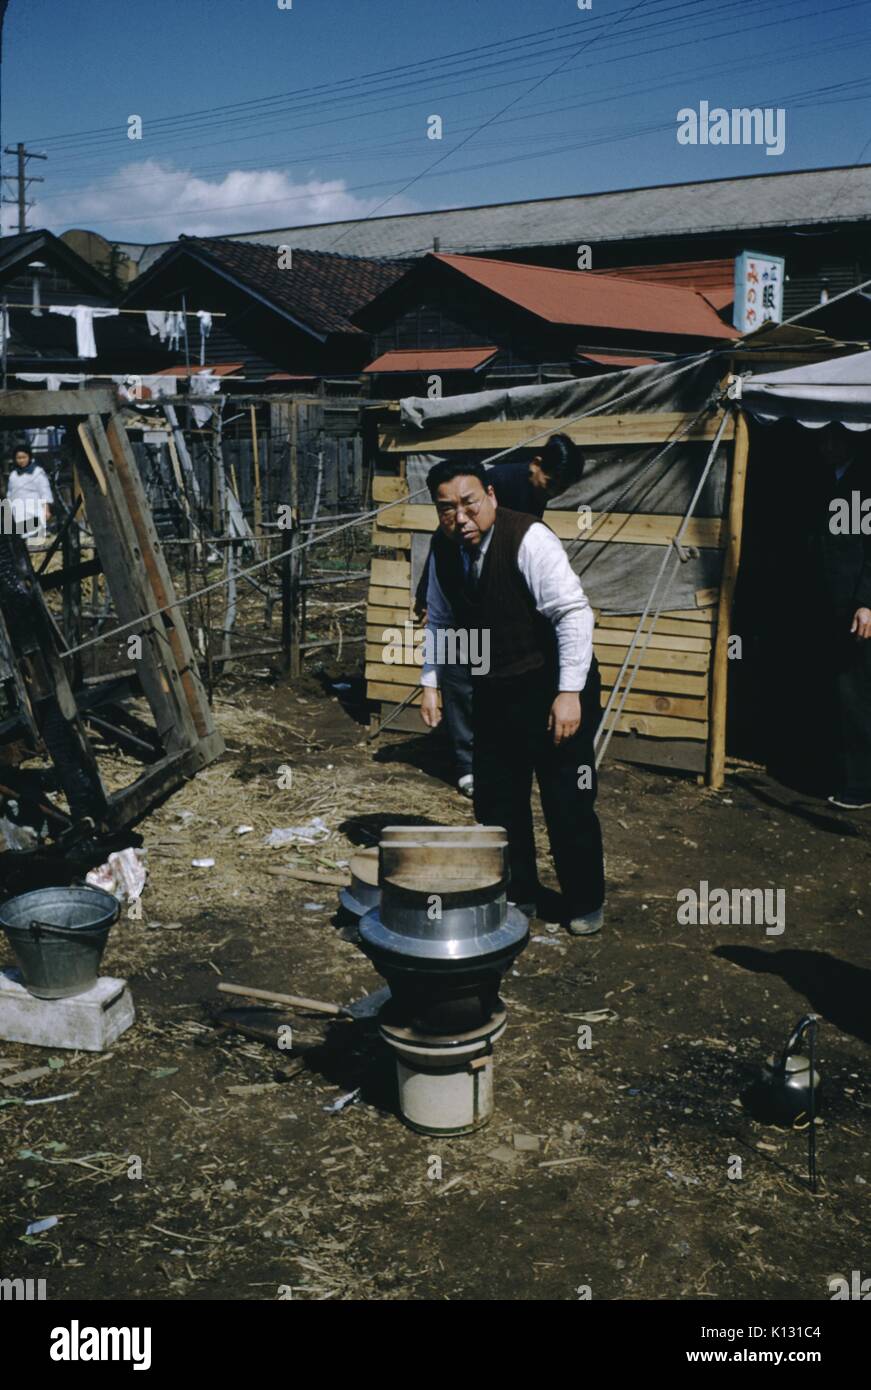 Japanese man in black vest and white shirt, bending over and heating a vessel on an outdoor heater, a teapot visible on the ground, Japan, 1952. Stock Photo